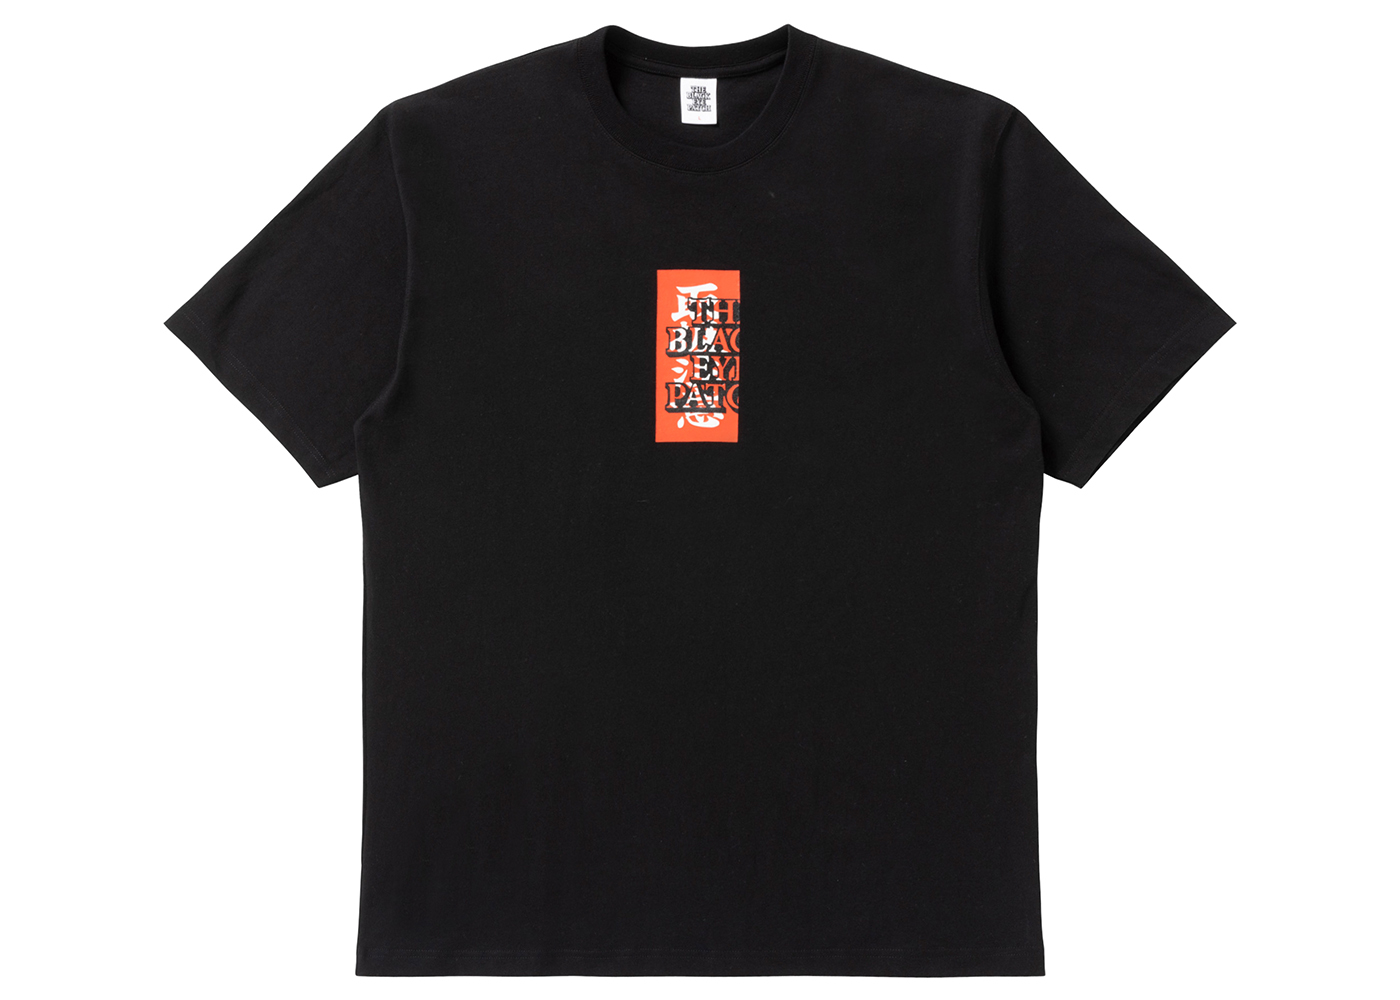 BlackEyePatch Handle with Care Label Tee Black - SS22 - TW